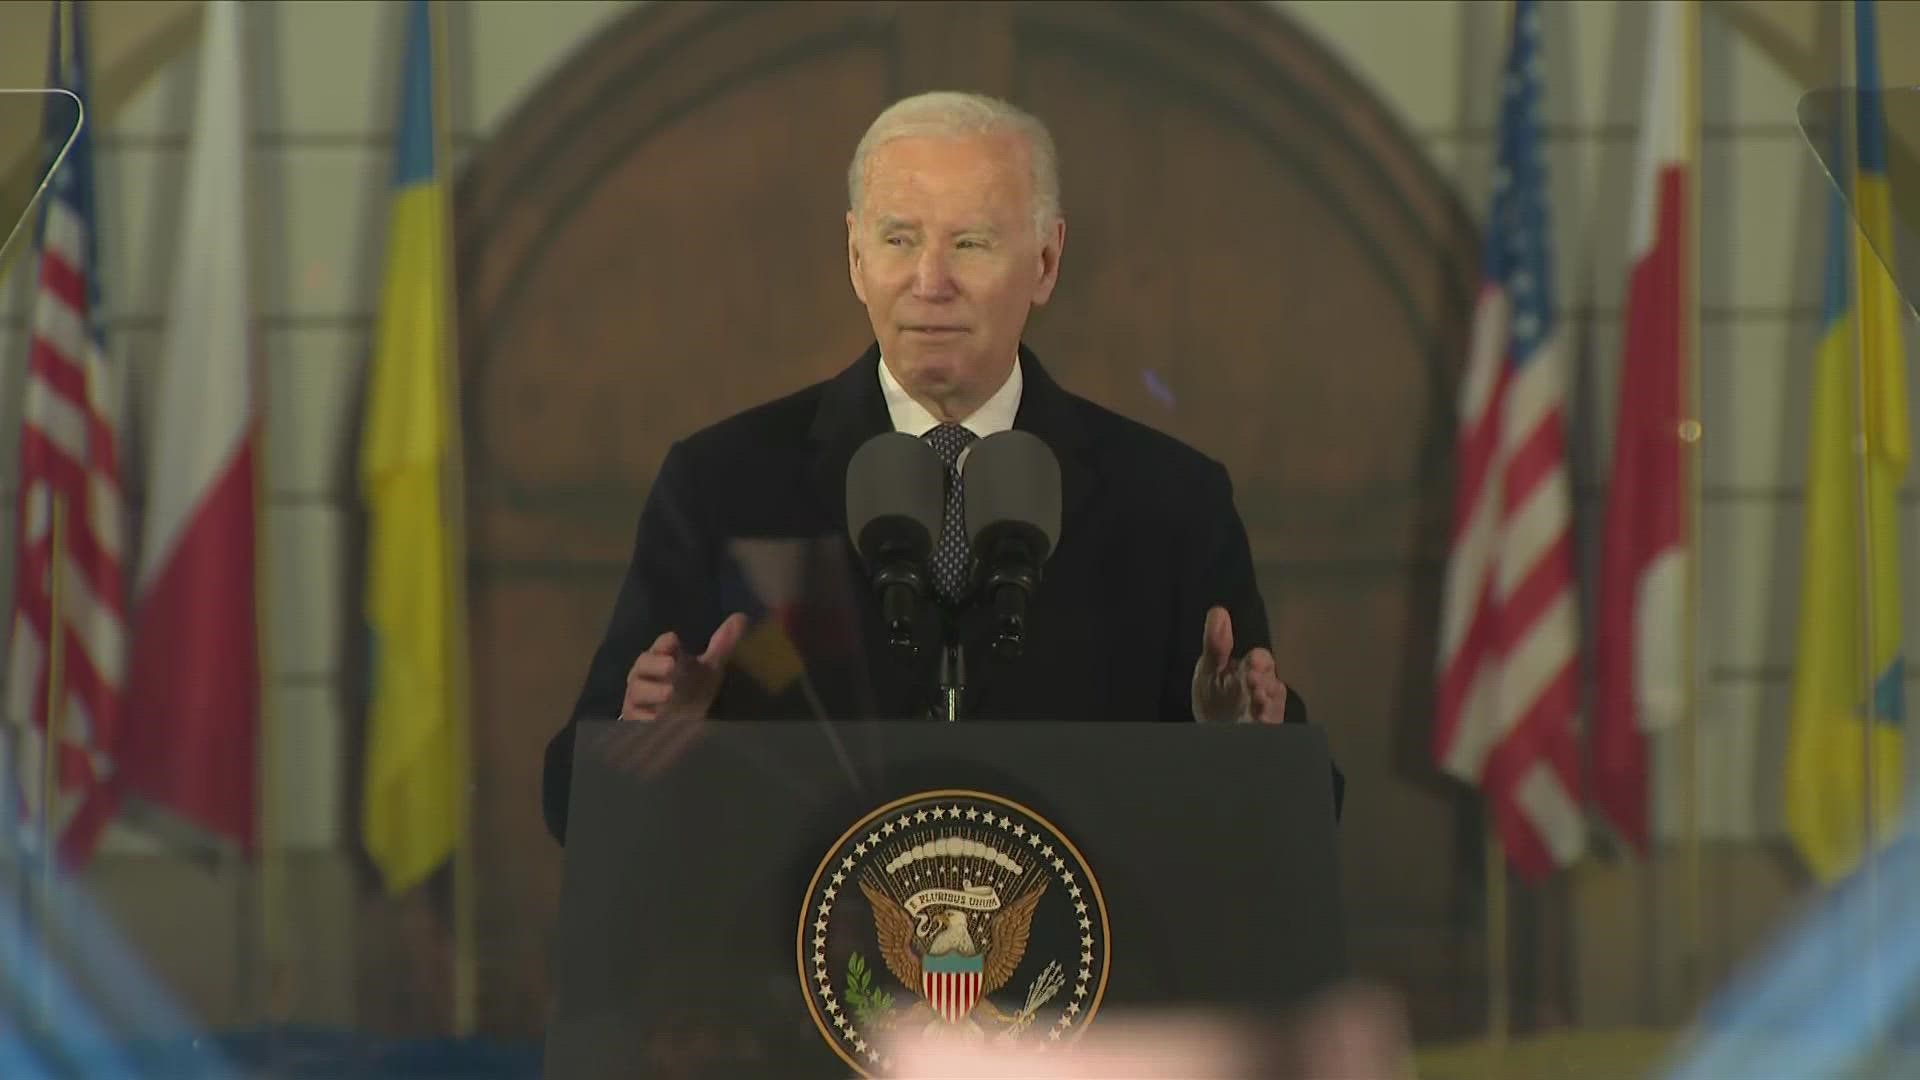 Biden spoke during a visit to Poland as the one-year anniversary of Russia's invasion of Ukraine nears.